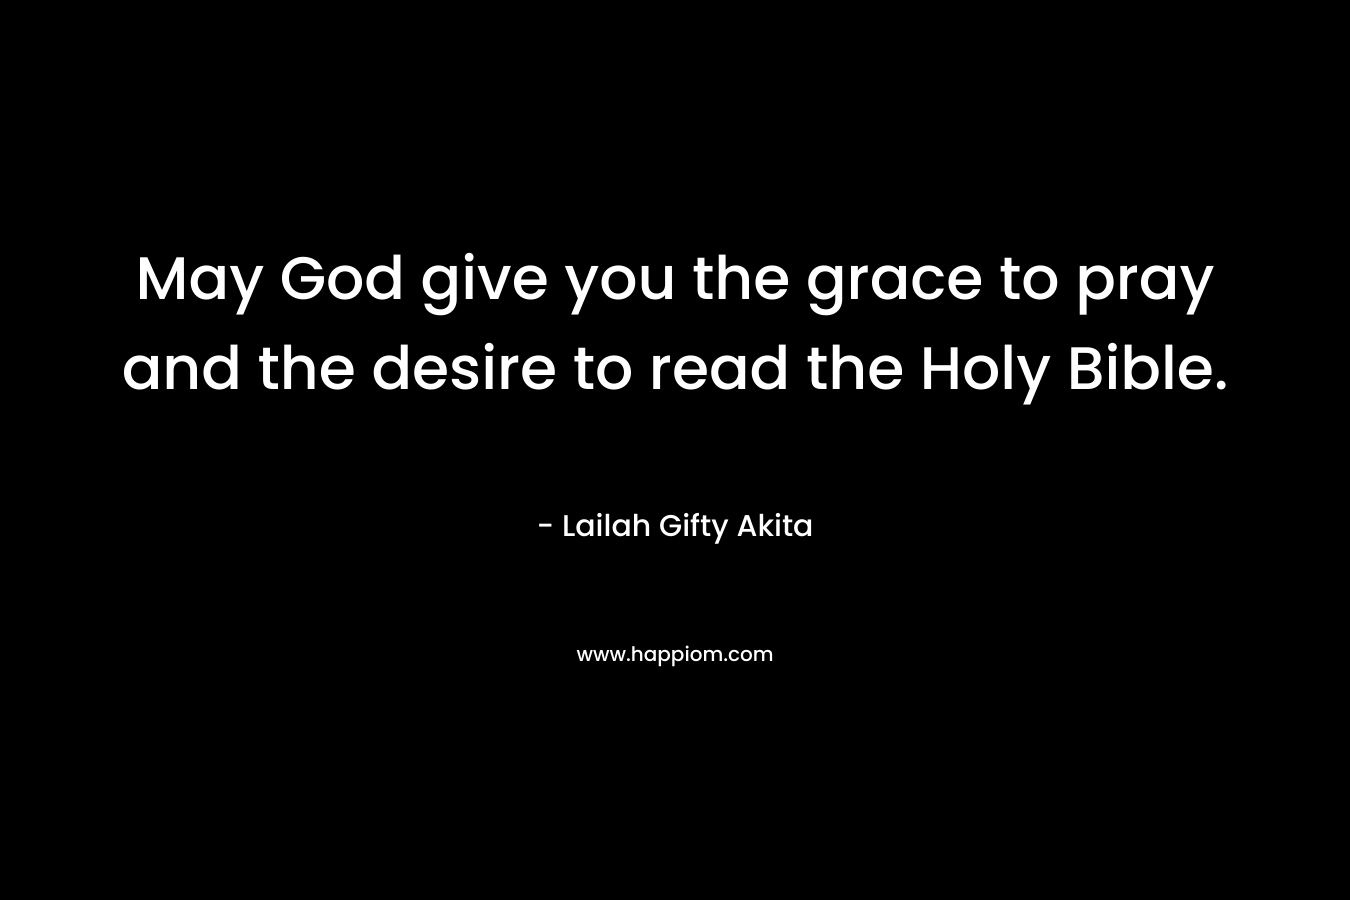 May God give you the grace to pray and the desire to read the Holy Bible.